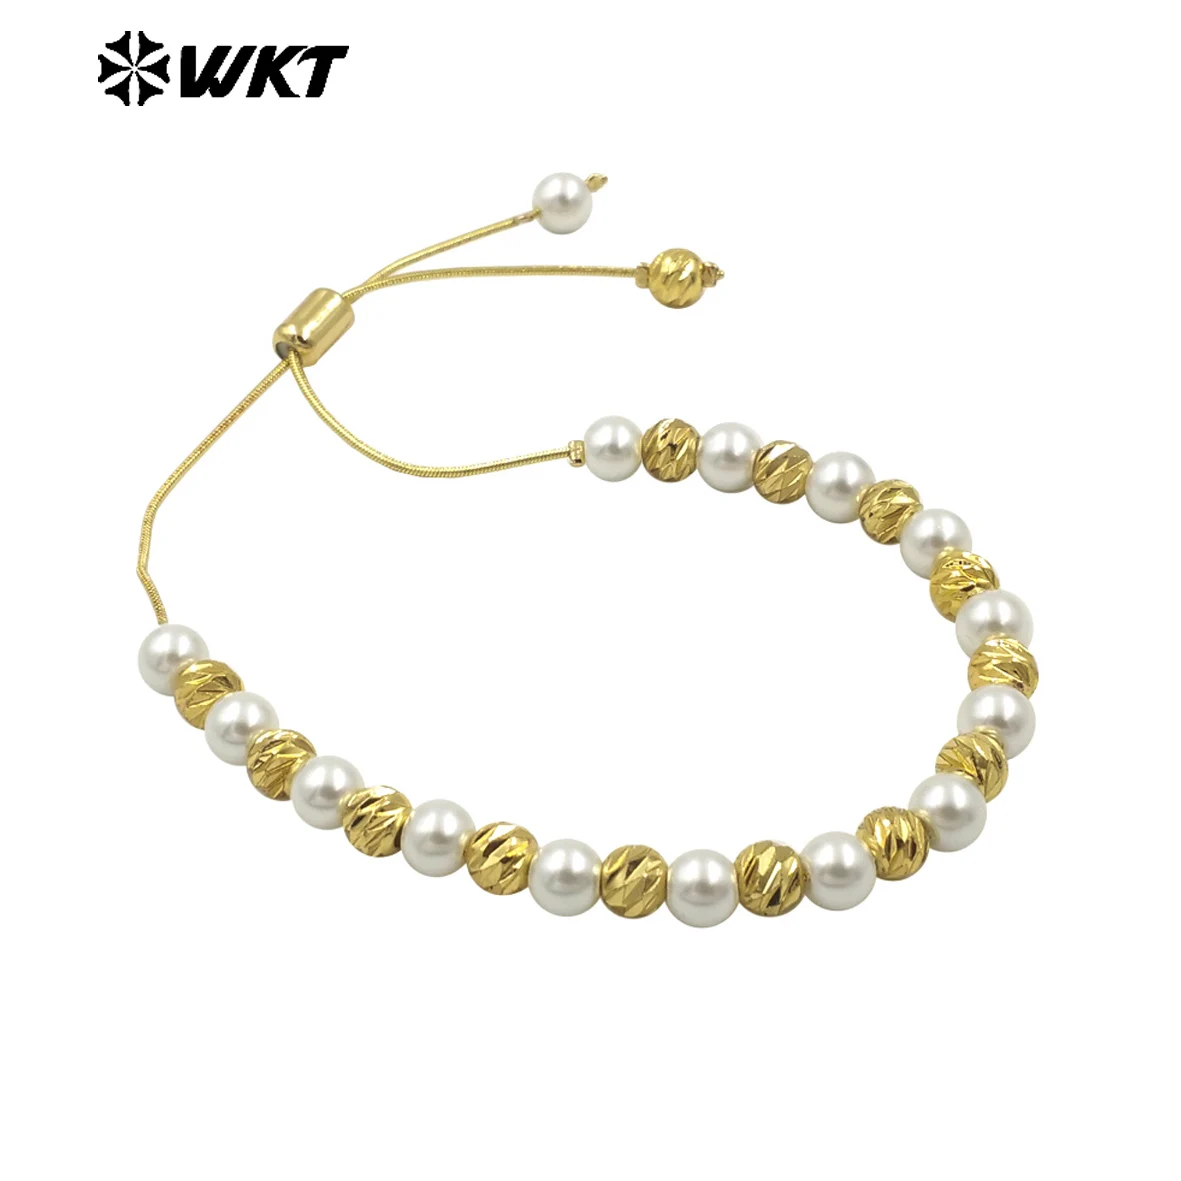 

WT-JF352 Simple Beautiful In Artificial Pearl 18k Gold Beads Spacing Design Thin Adjustable Women Bracelet Decorated